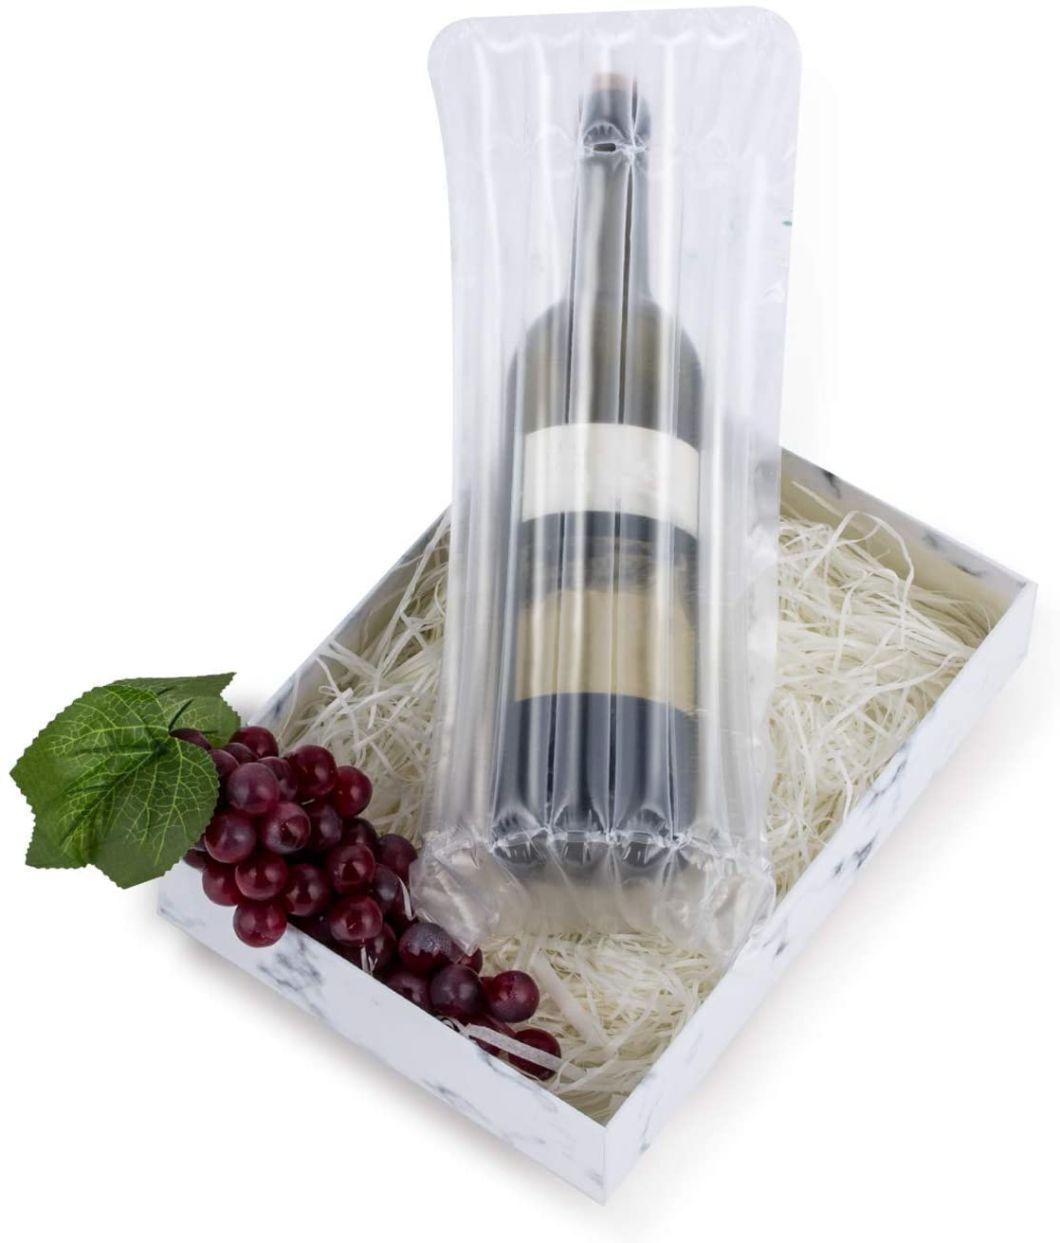 High Quality Roll of Inflatable Air Column Bags Packing for Red Wine Bottle